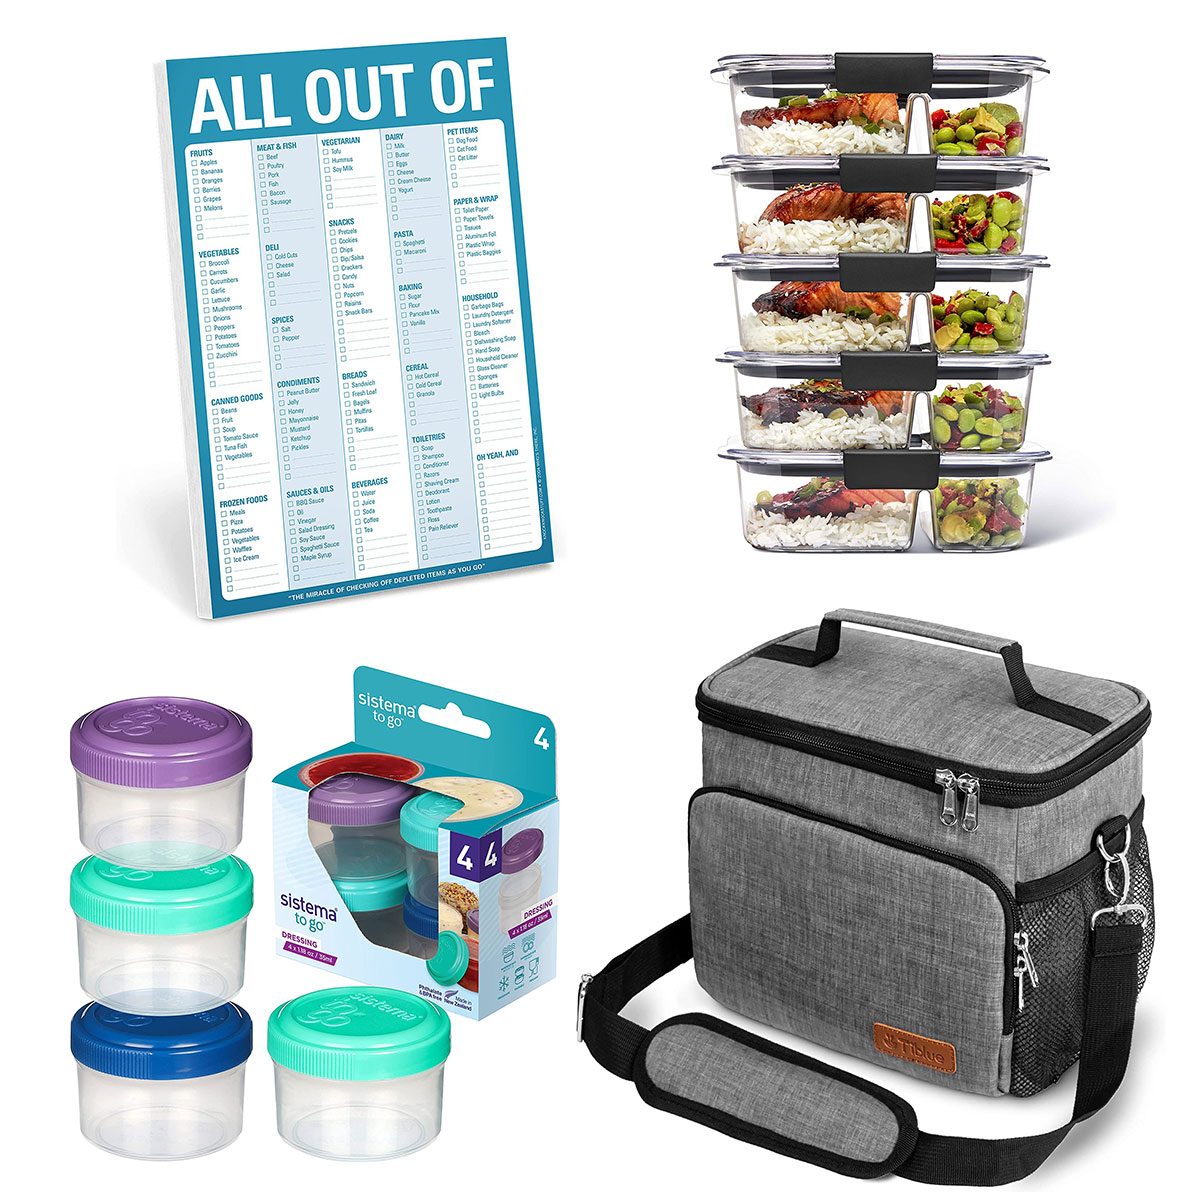 Best Meal Prep Containers And Tools for Success - MeowMeix